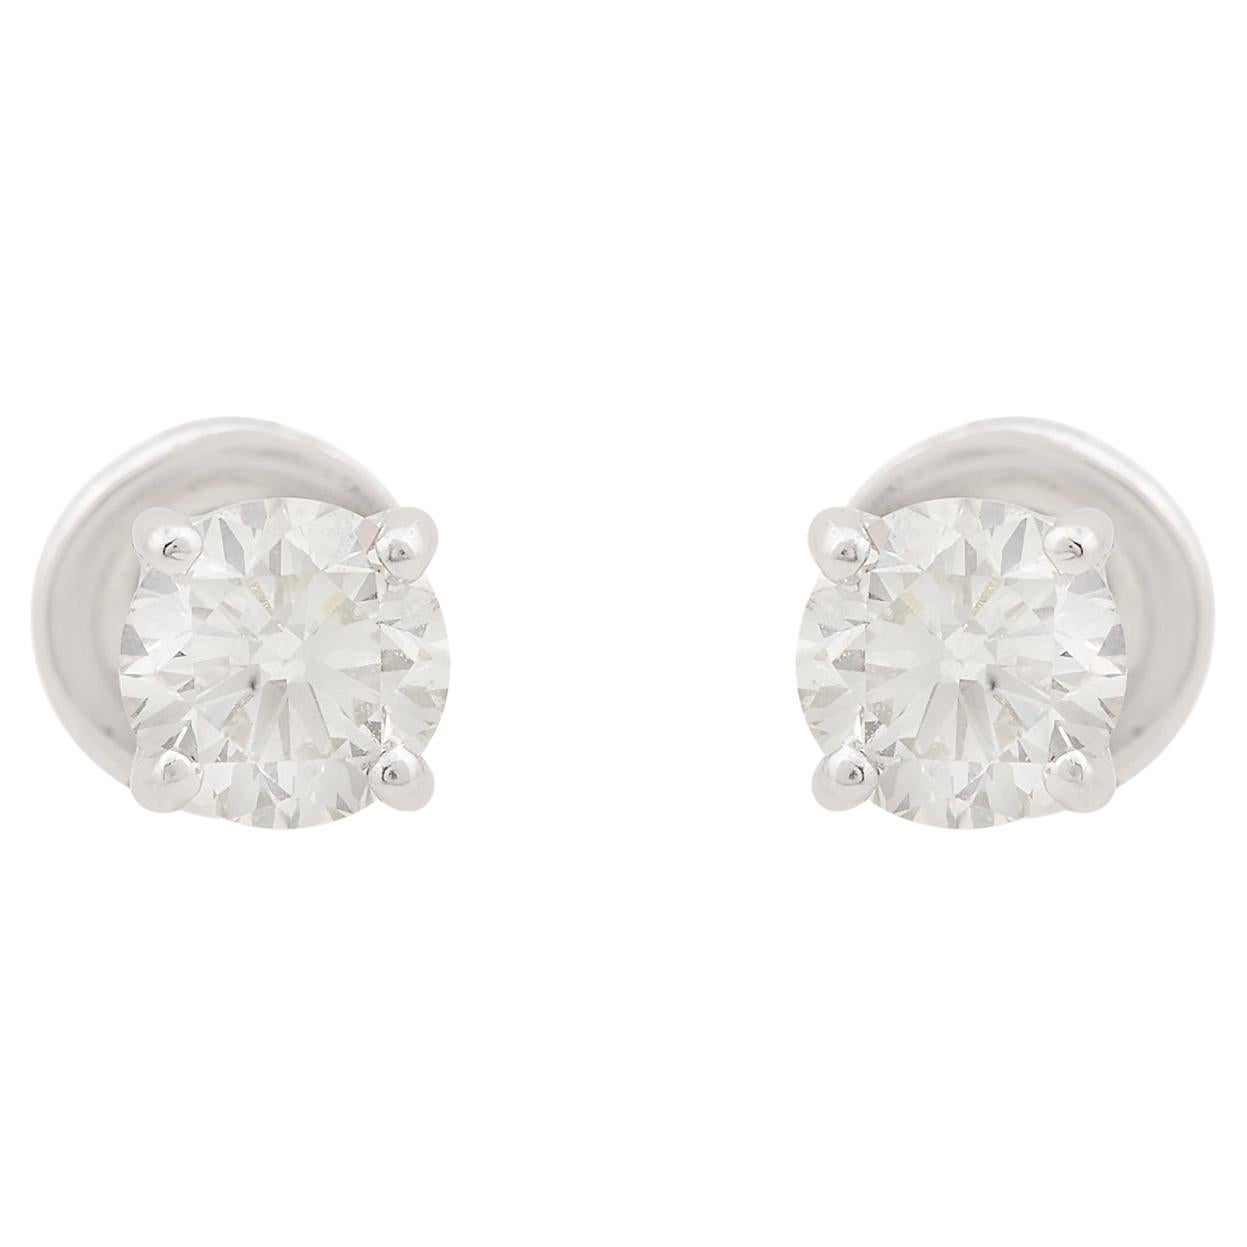 SI Clarity HI Color Solitaire Round Diamond Stud Earrings 10 Karat White Gold